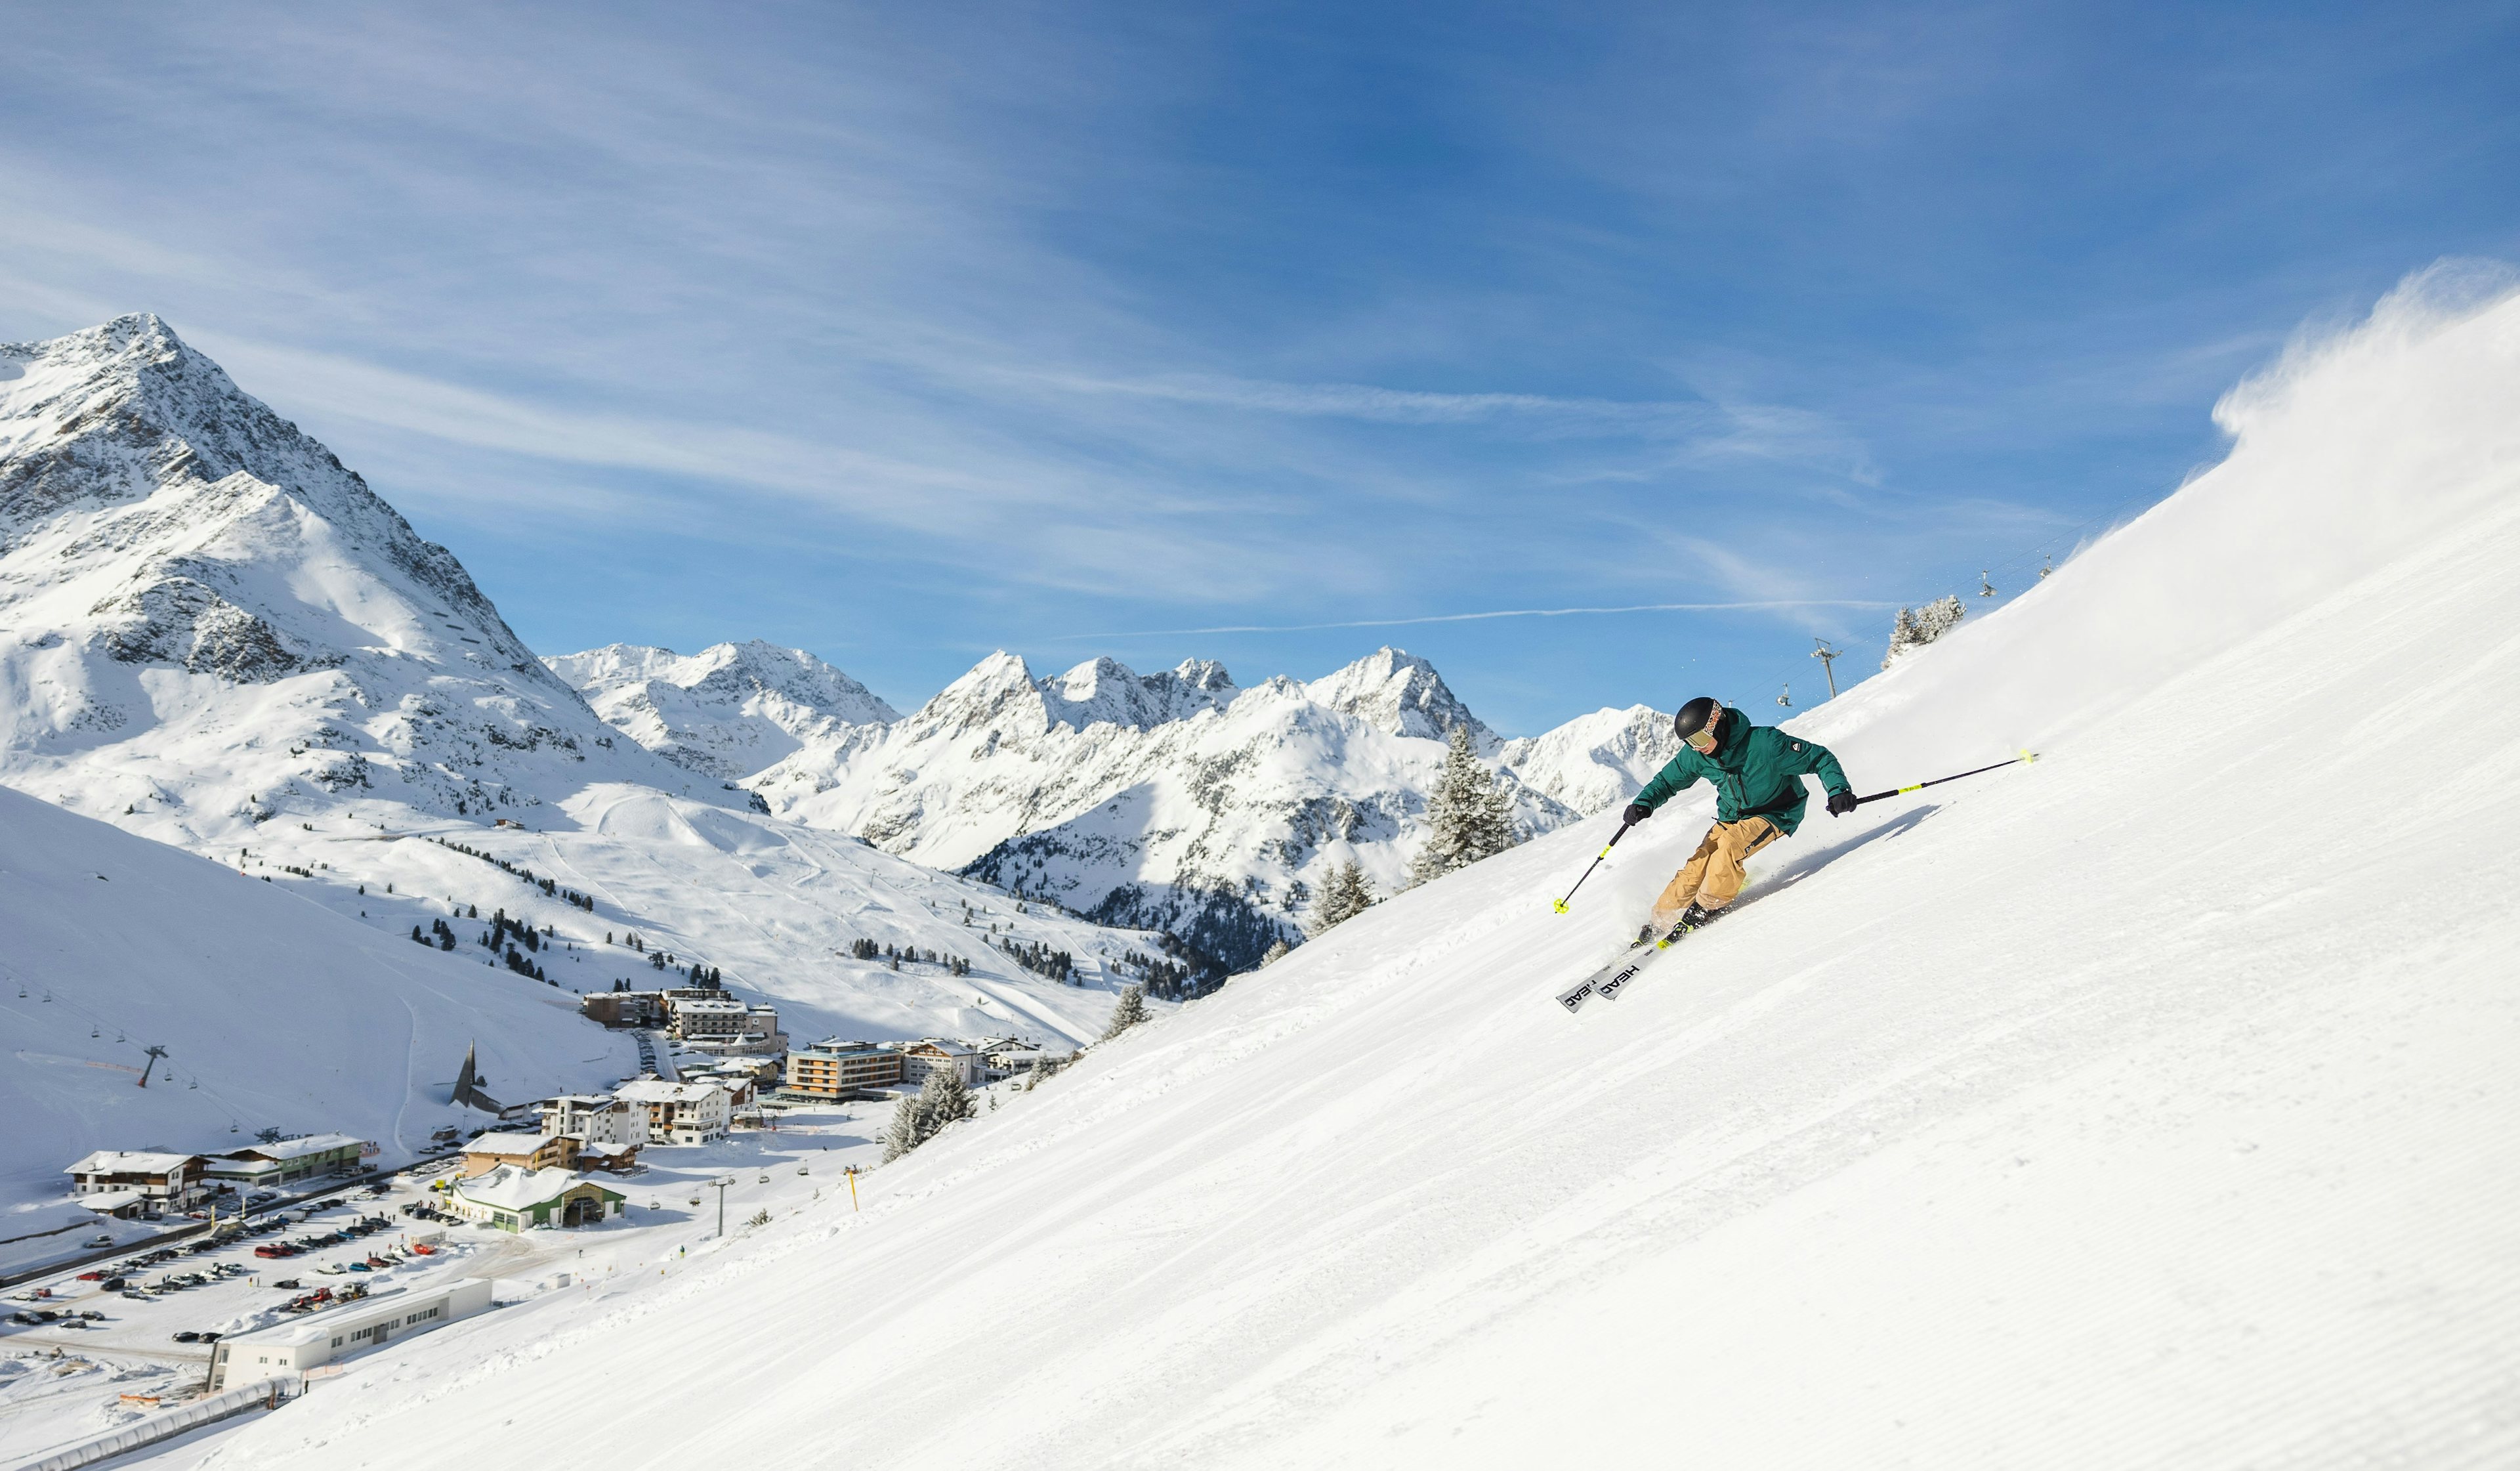 Ski resorts from Switzerland to Austria are drawing in a new flock of Chinese winter sports fans. Photo: Jason Wang